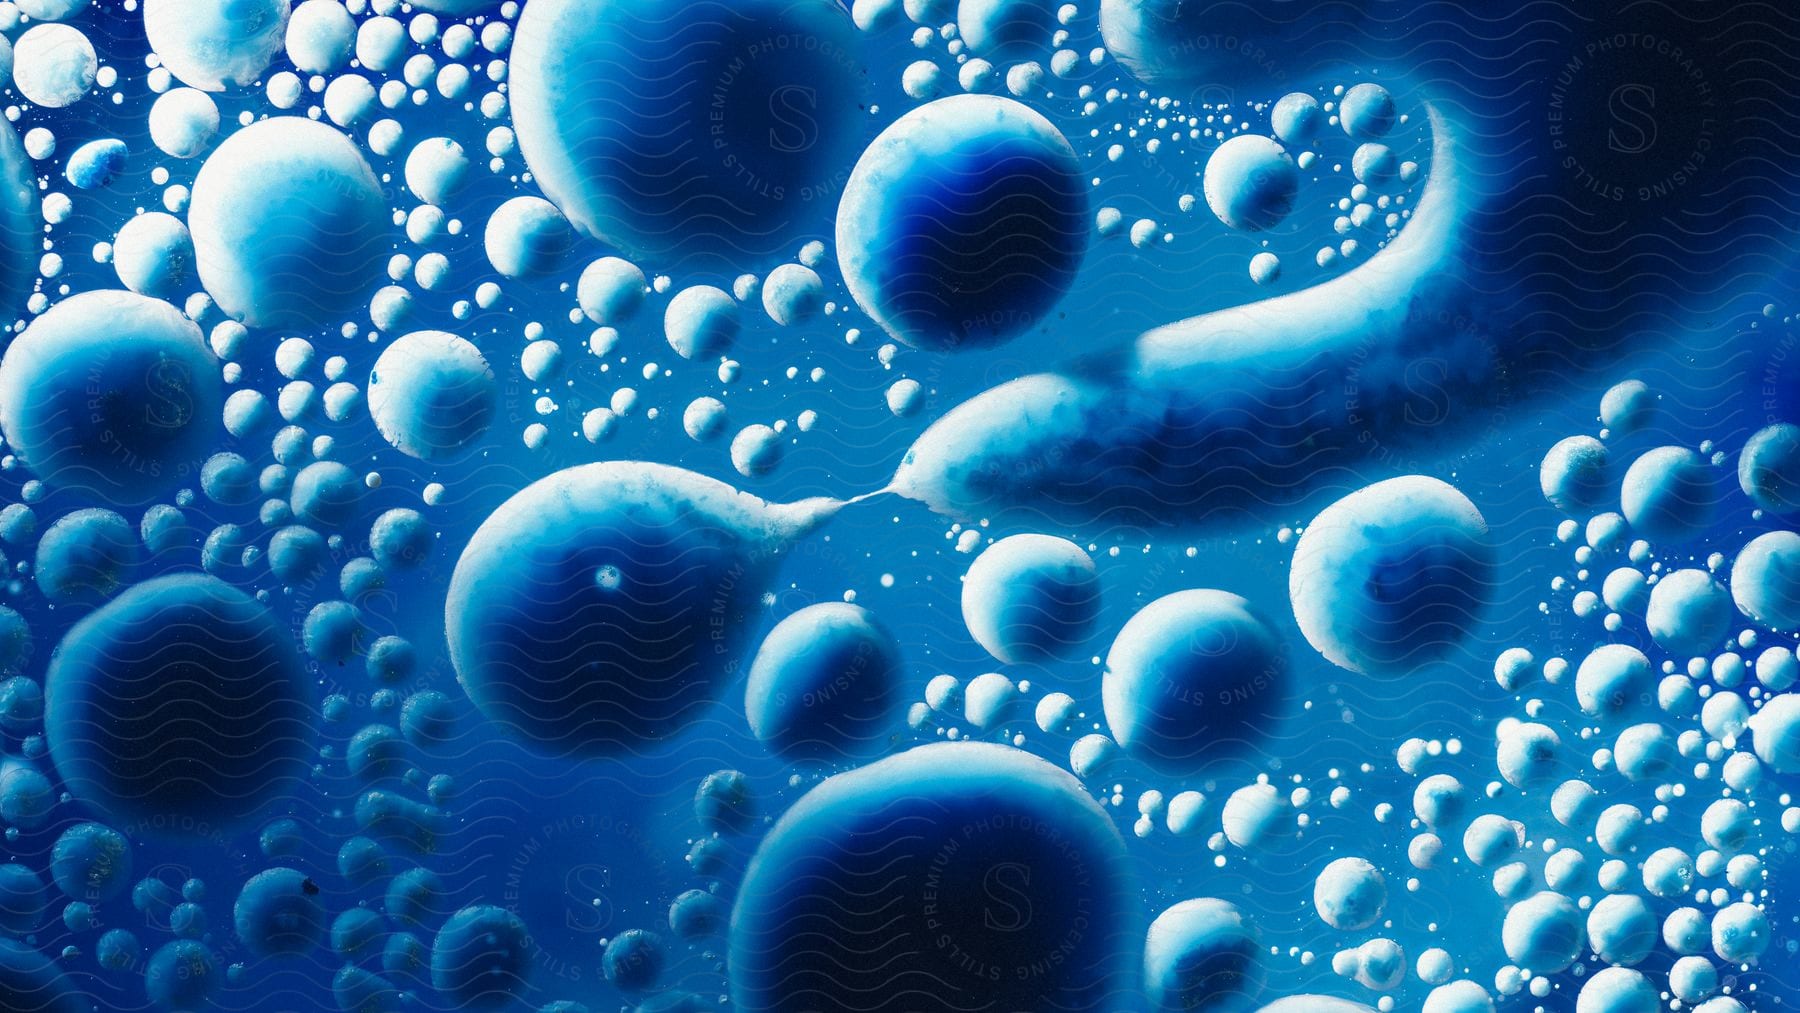 Blue blobs and bubbles floating in liquid